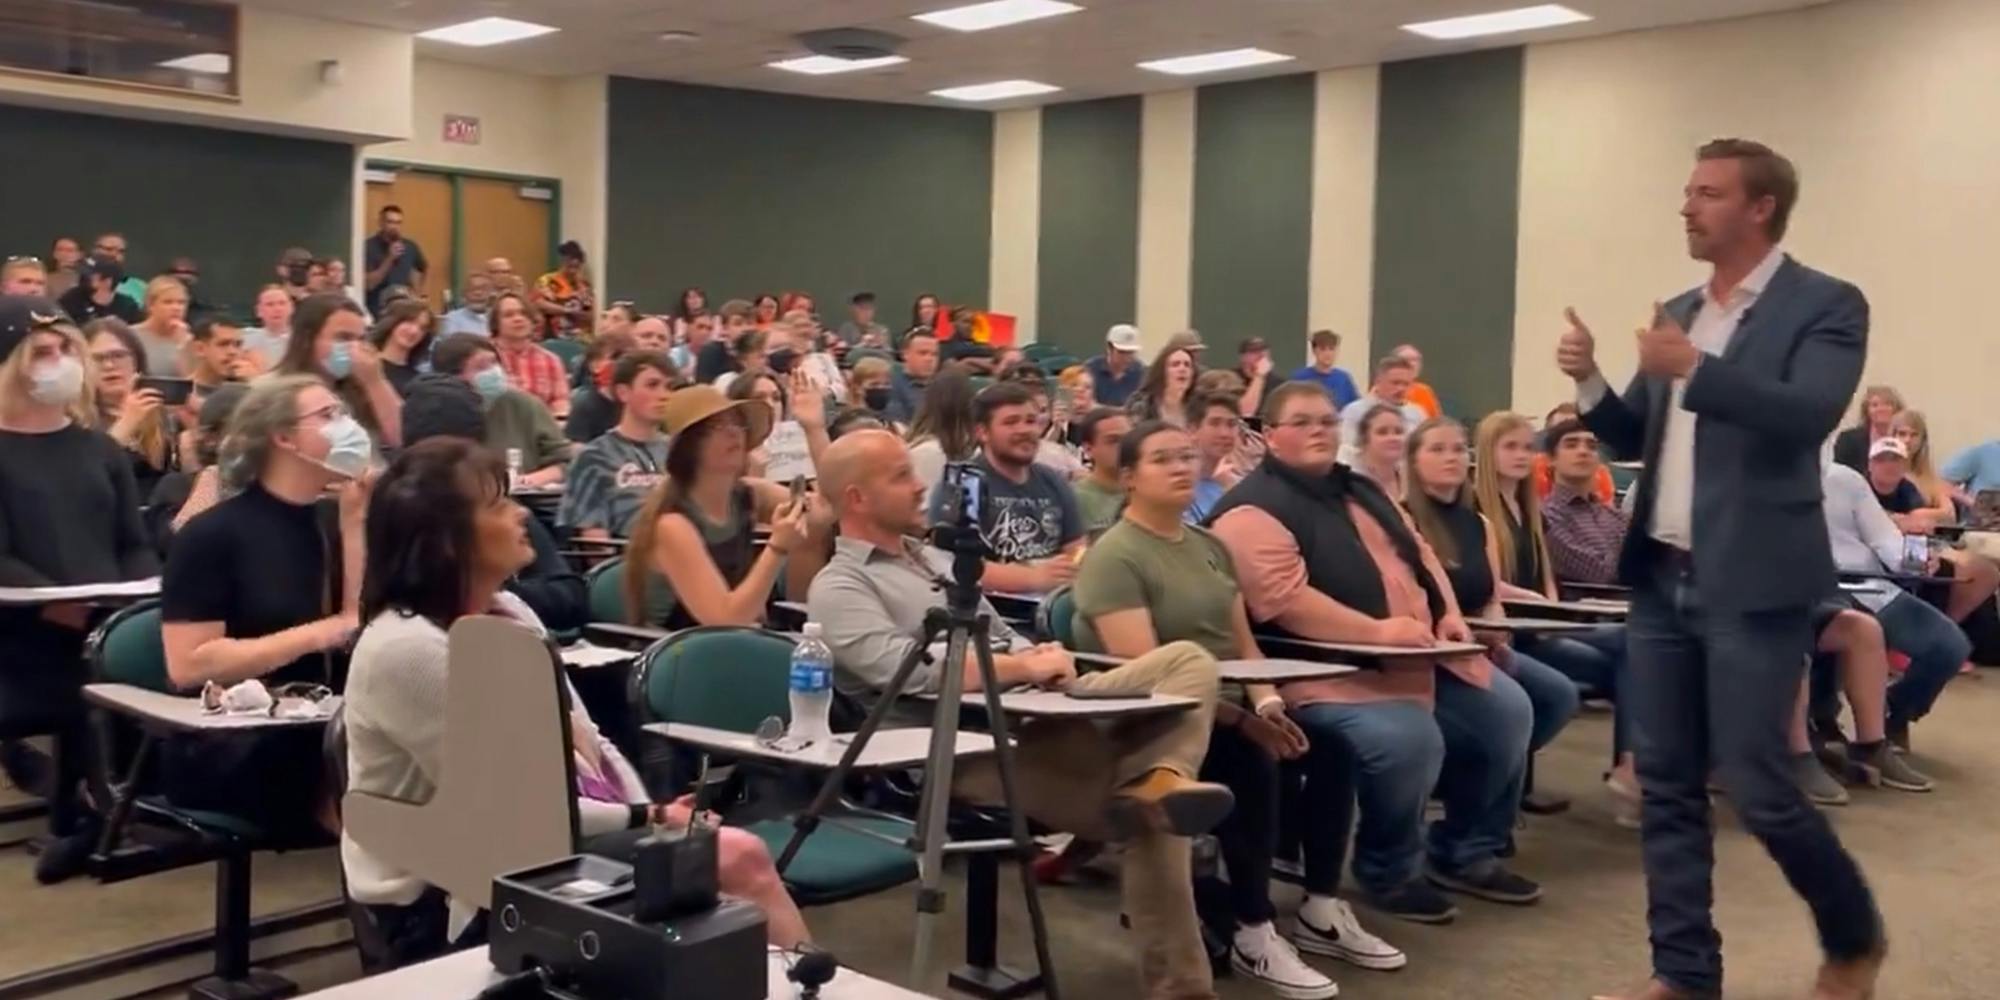 Oklahoma education official Ryan Walters ends speech amid protest after saying ‘never back down to a woke mob’